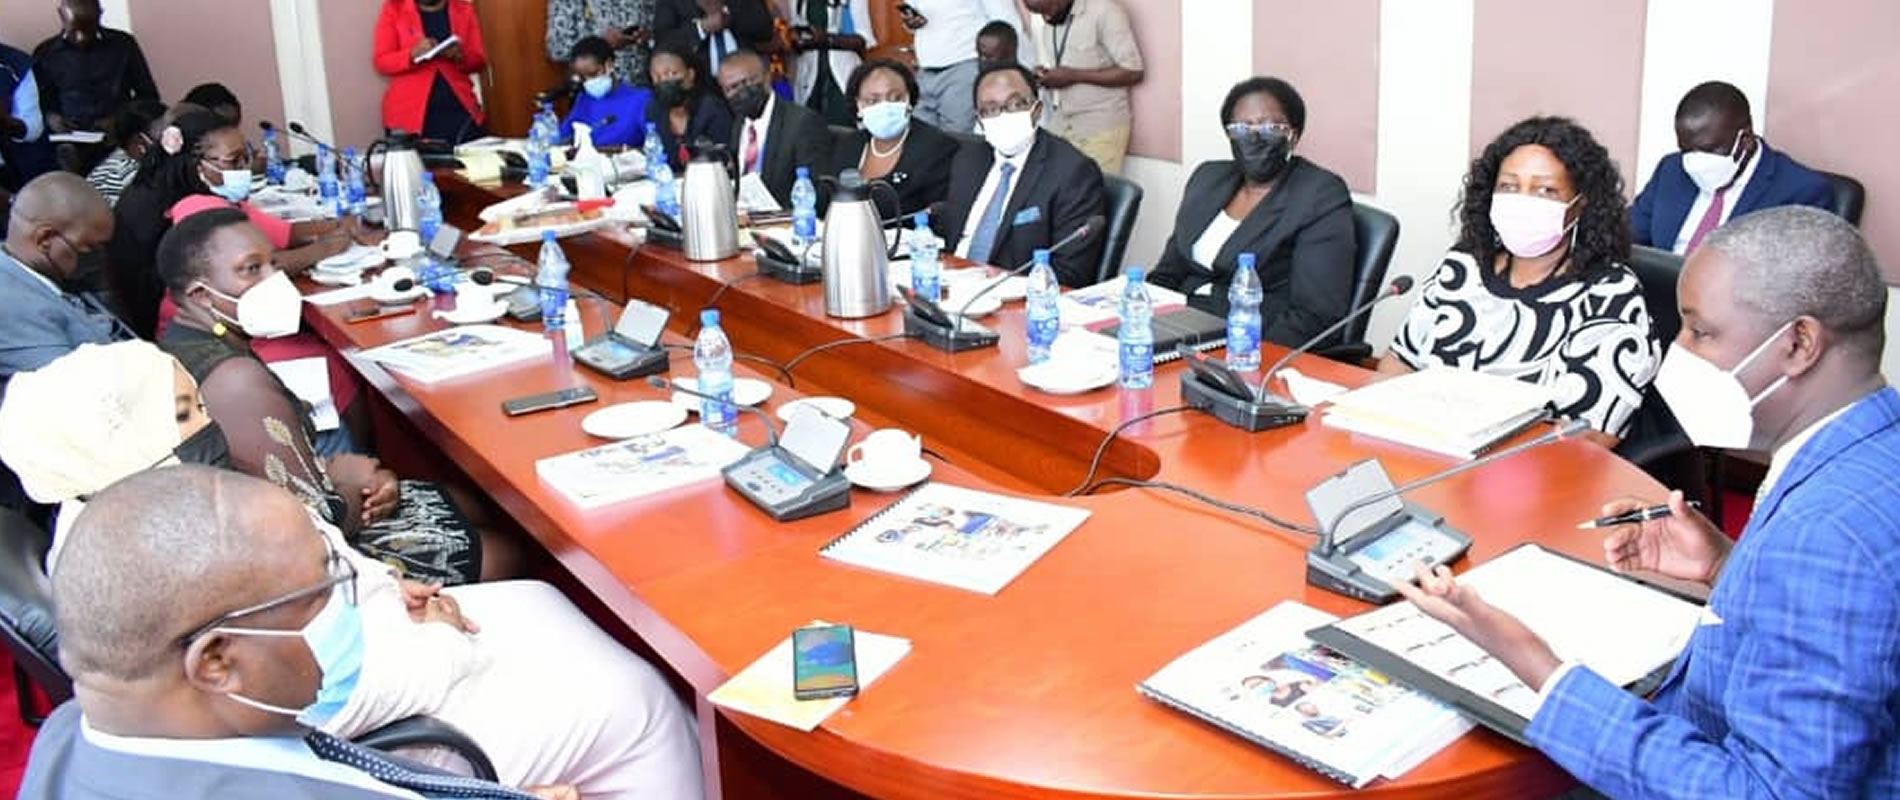 TE. The Chairperson UHRC, Members of the Commission and staff of UHRC presenting the 24th Annual Report on the state of human rights and freedoms in Uganda in 2021 to the Deputy Speaker of Parliament Rt. Hon. Thomas Tayebwa at Parliament on June 13th 2022.